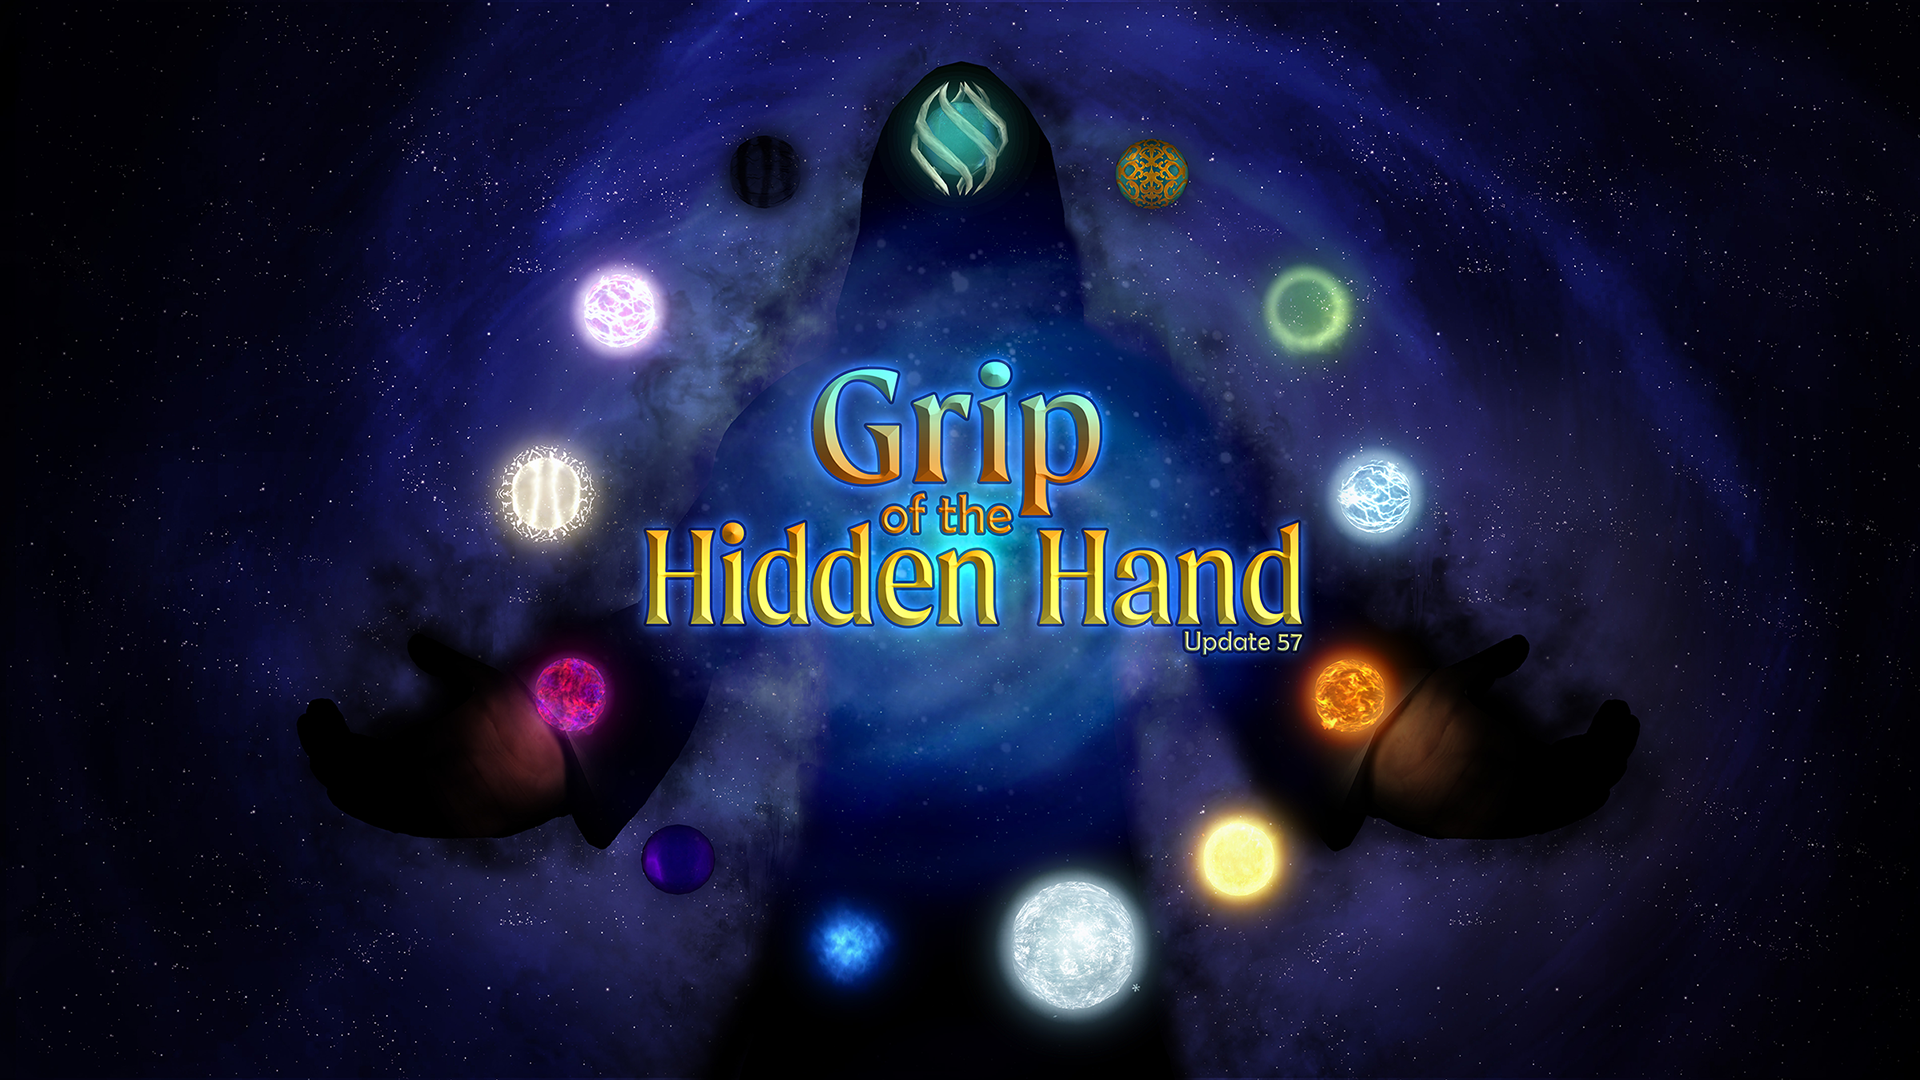 DDO Update 57: Grip of the Hidden Hand – New Quest Pack and Gameplay Updates